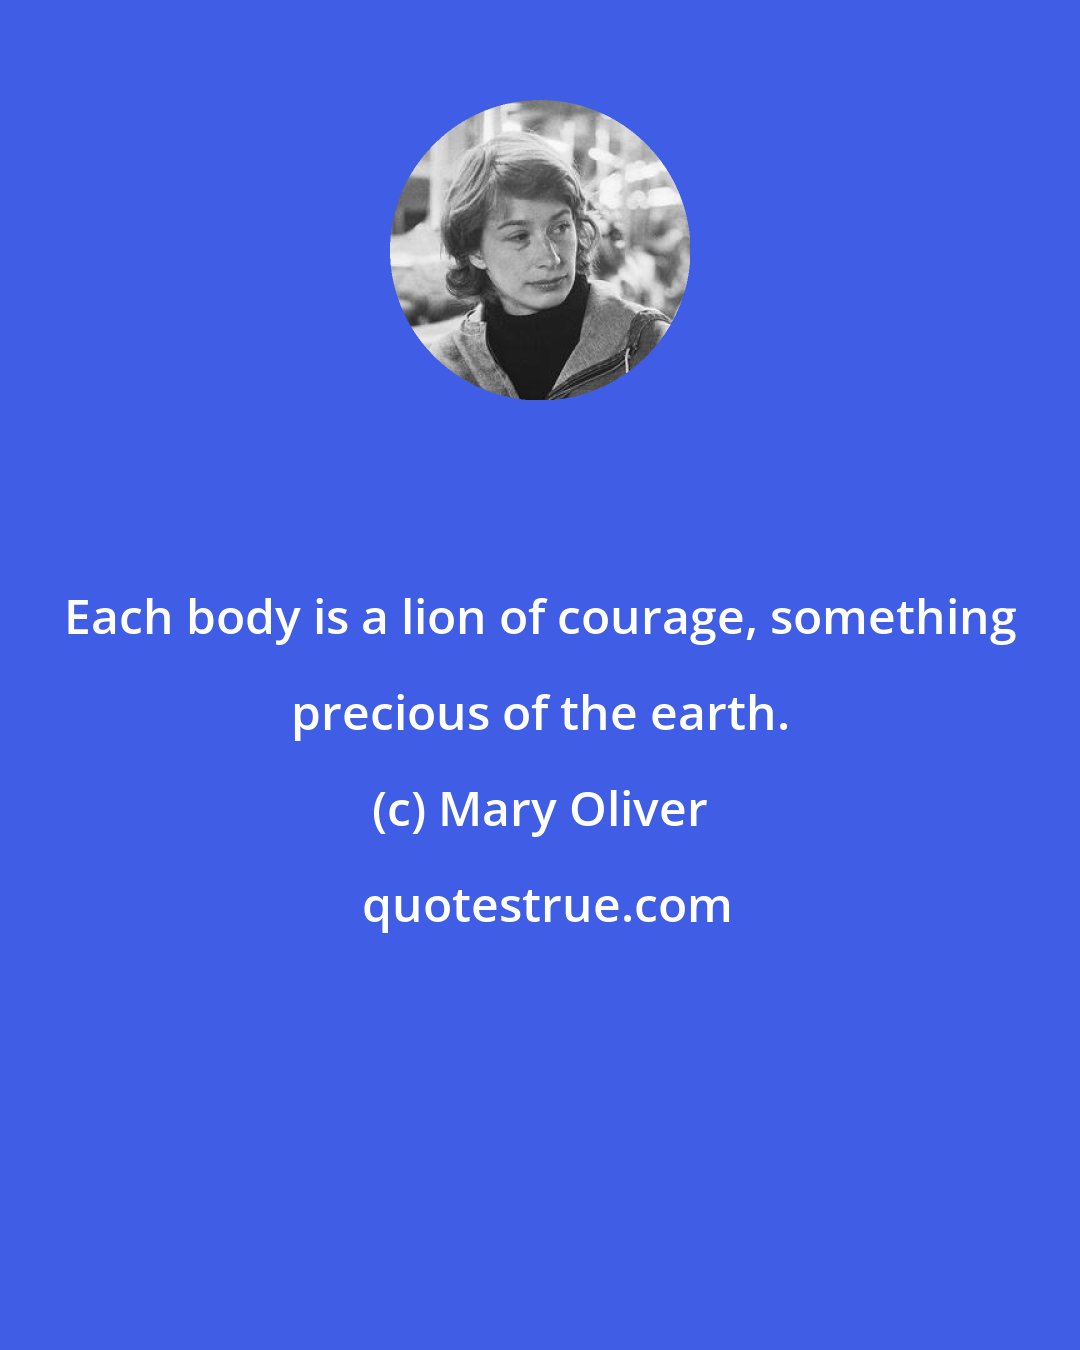 Mary Oliver: Each body is a lion of courage, something precious of the earth.